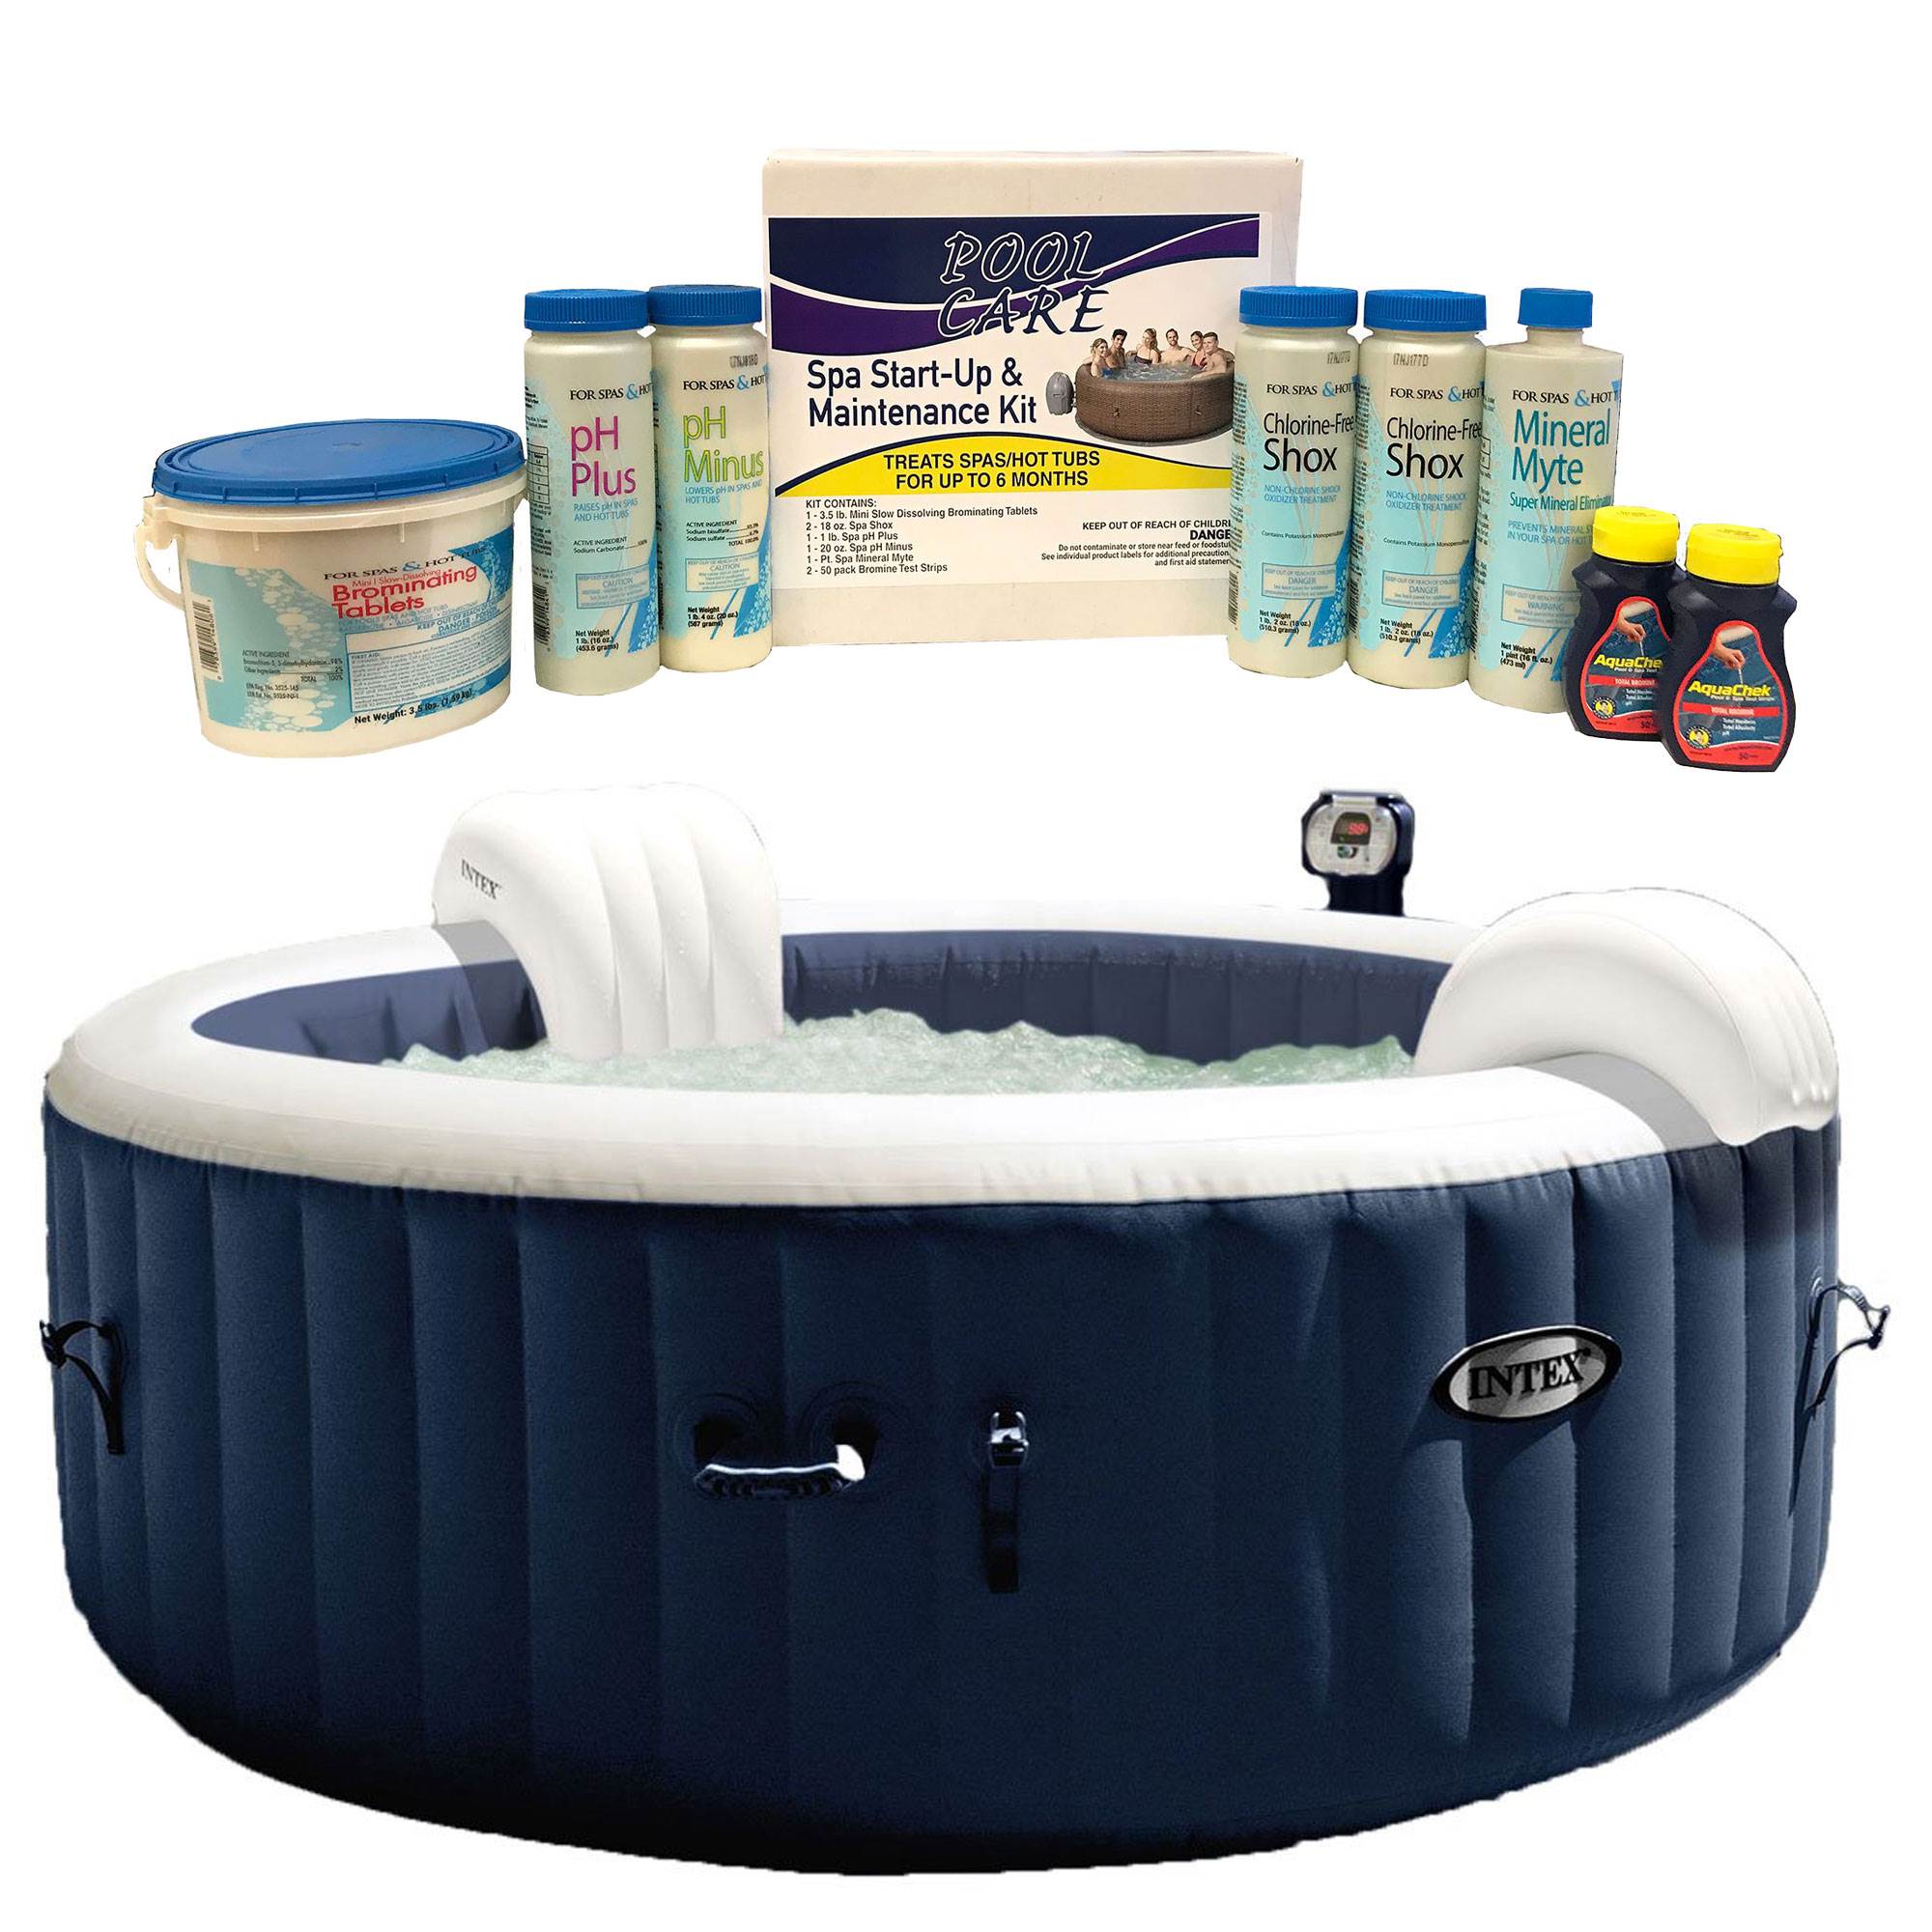 Intex Pure Spa 6 Person Inflatable Hot Tub And Qualco Home 6 Month Chemical Kit Ebay